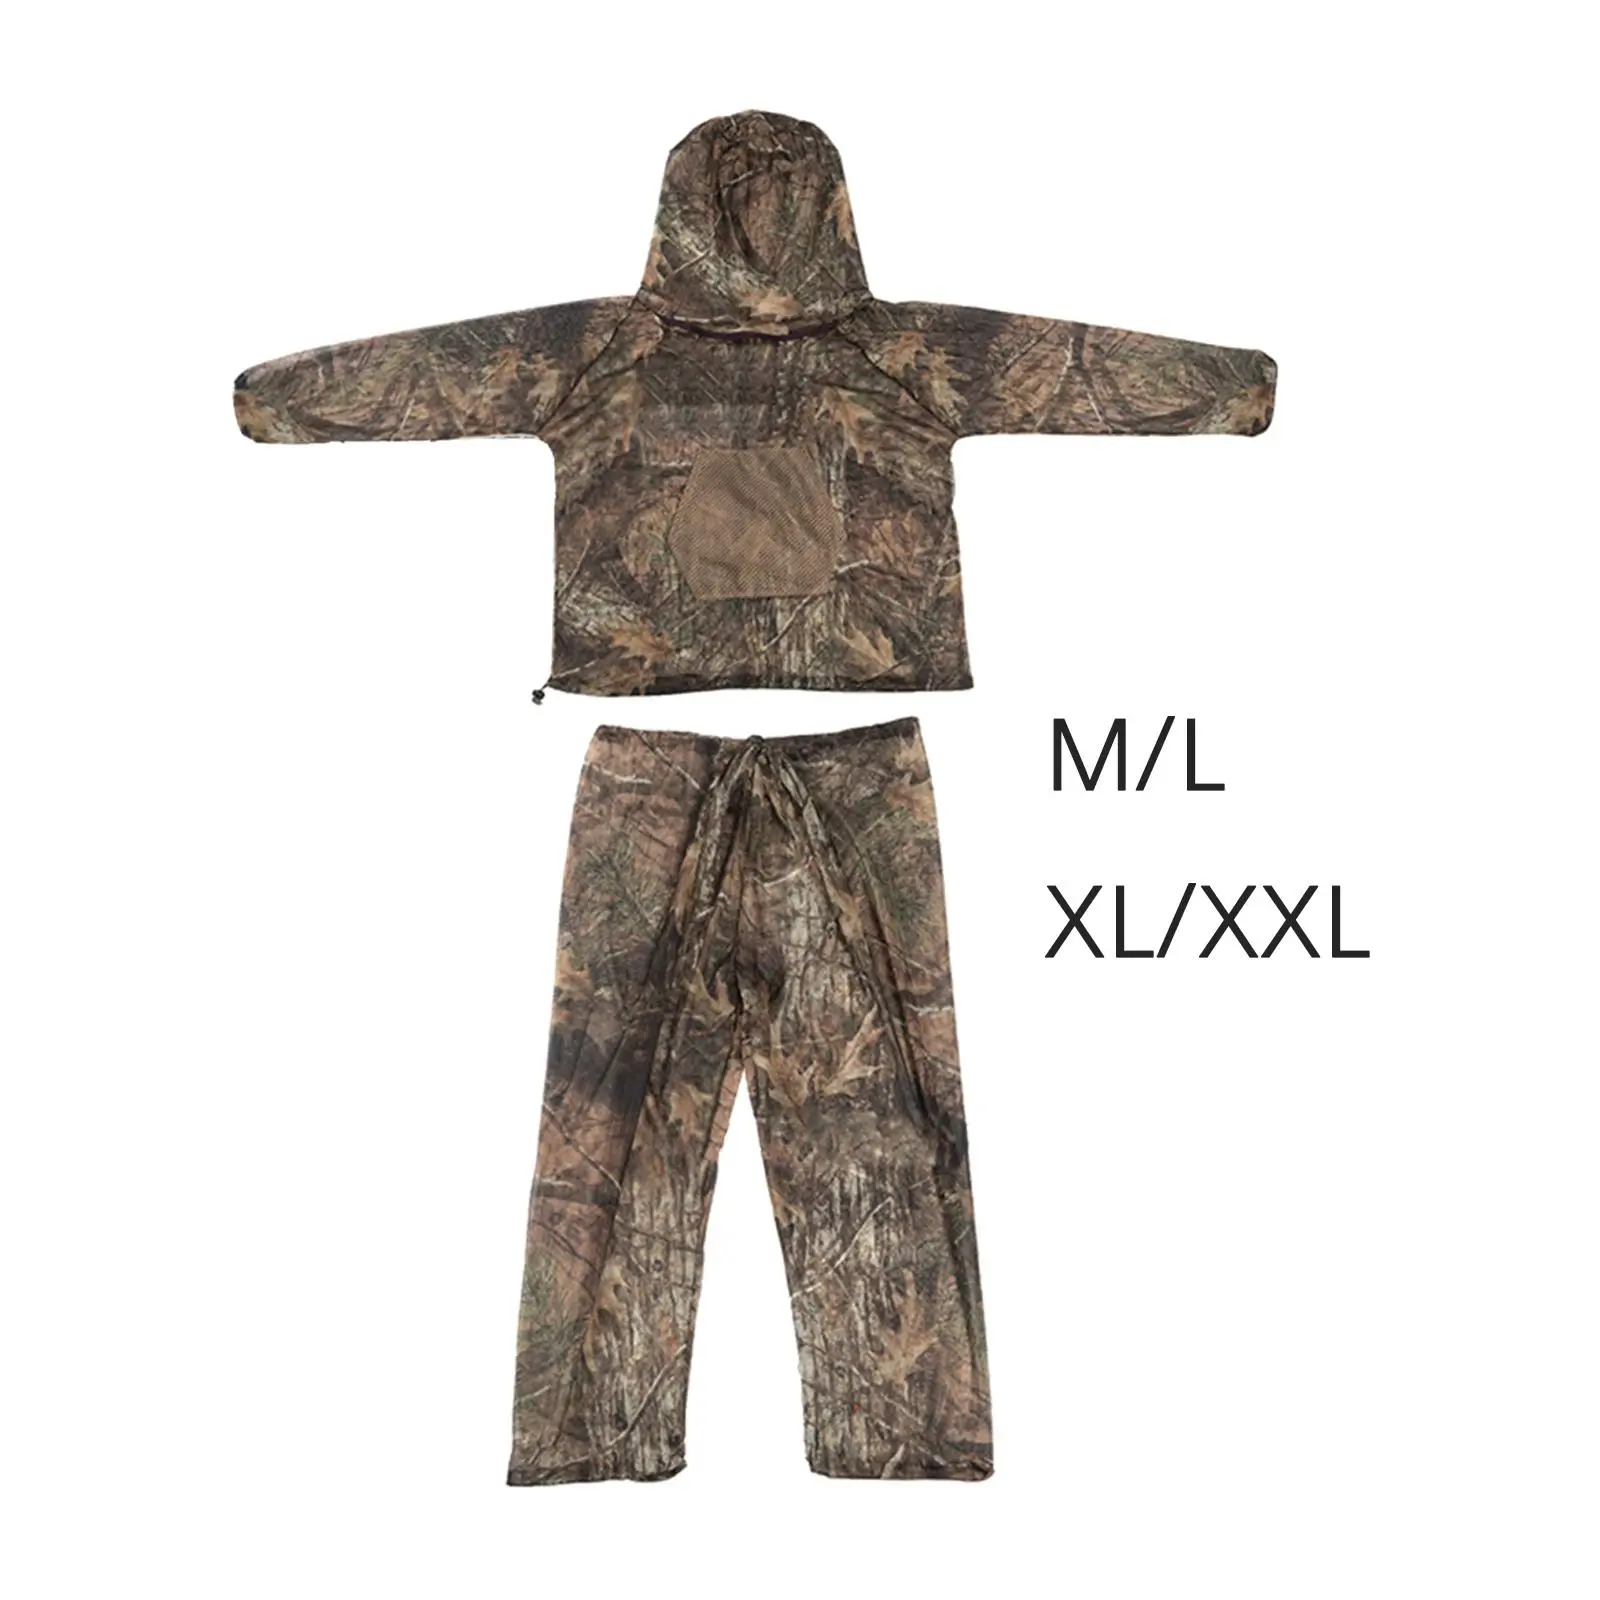 Mesh Hooded suits protection Lightweight Pants for Camping Hunting